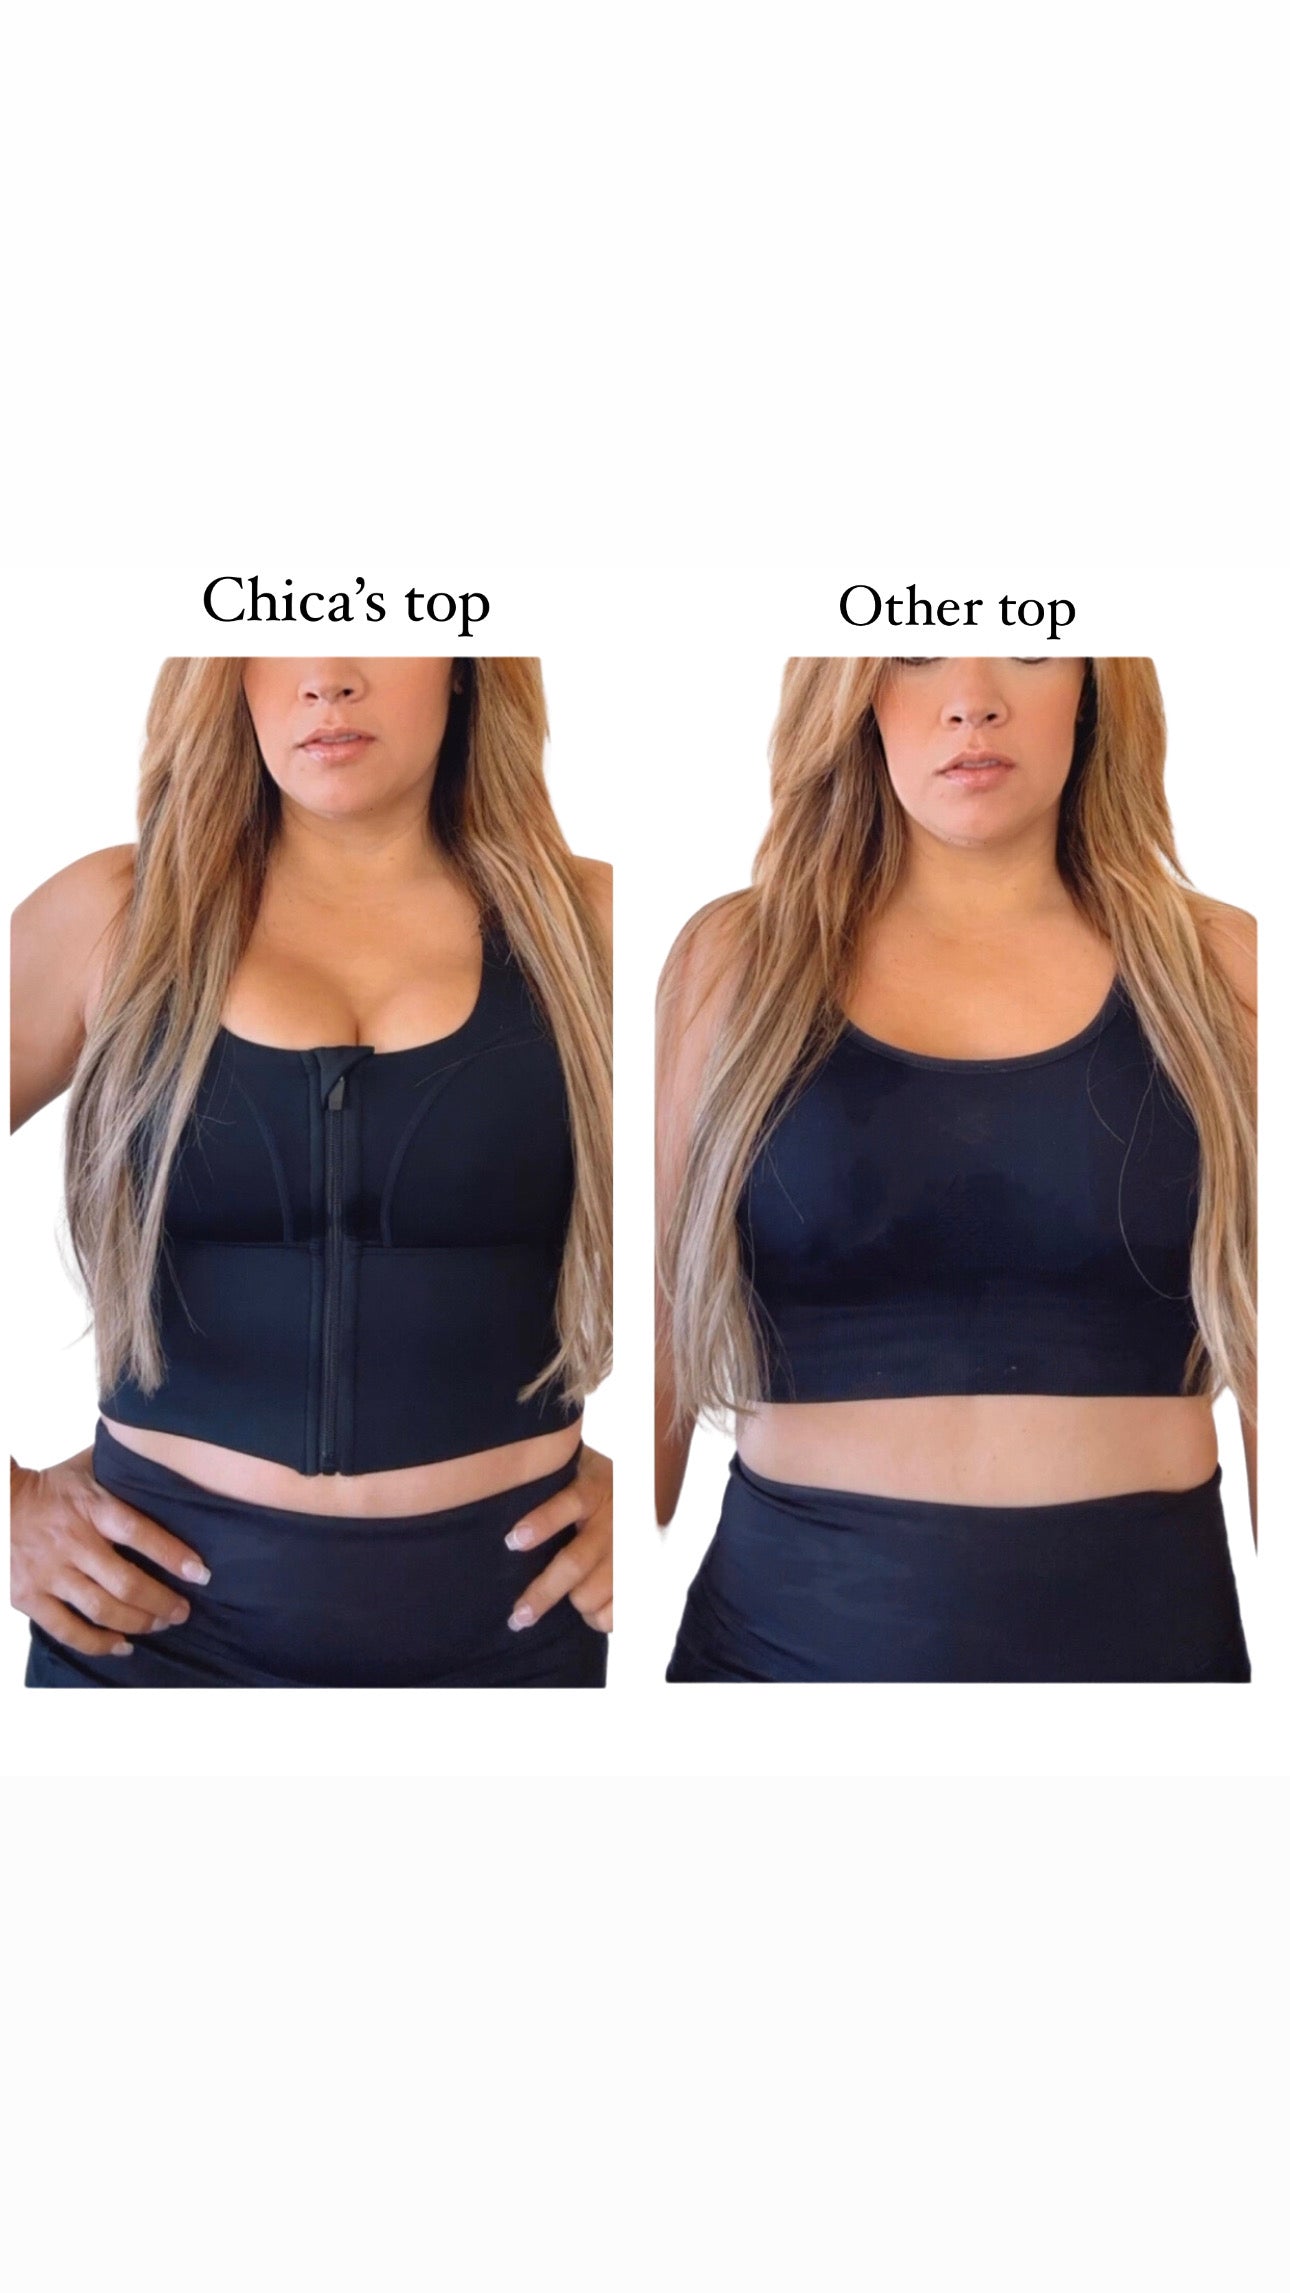 Chica’s Sculpted Top